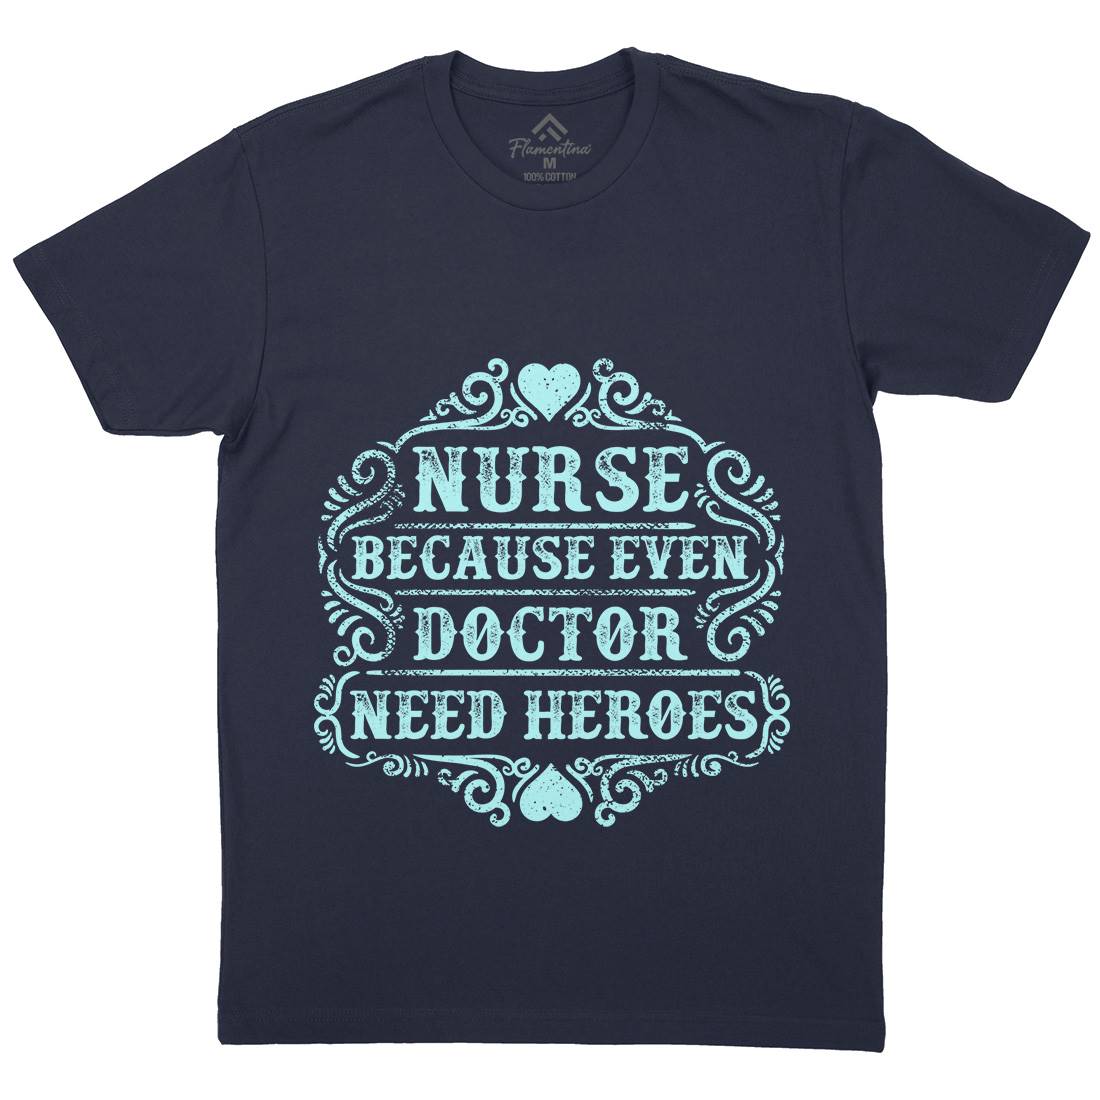 Nurse Because Even Doctor Need Heroes Mens Crew Neck T-Shirt Work C969